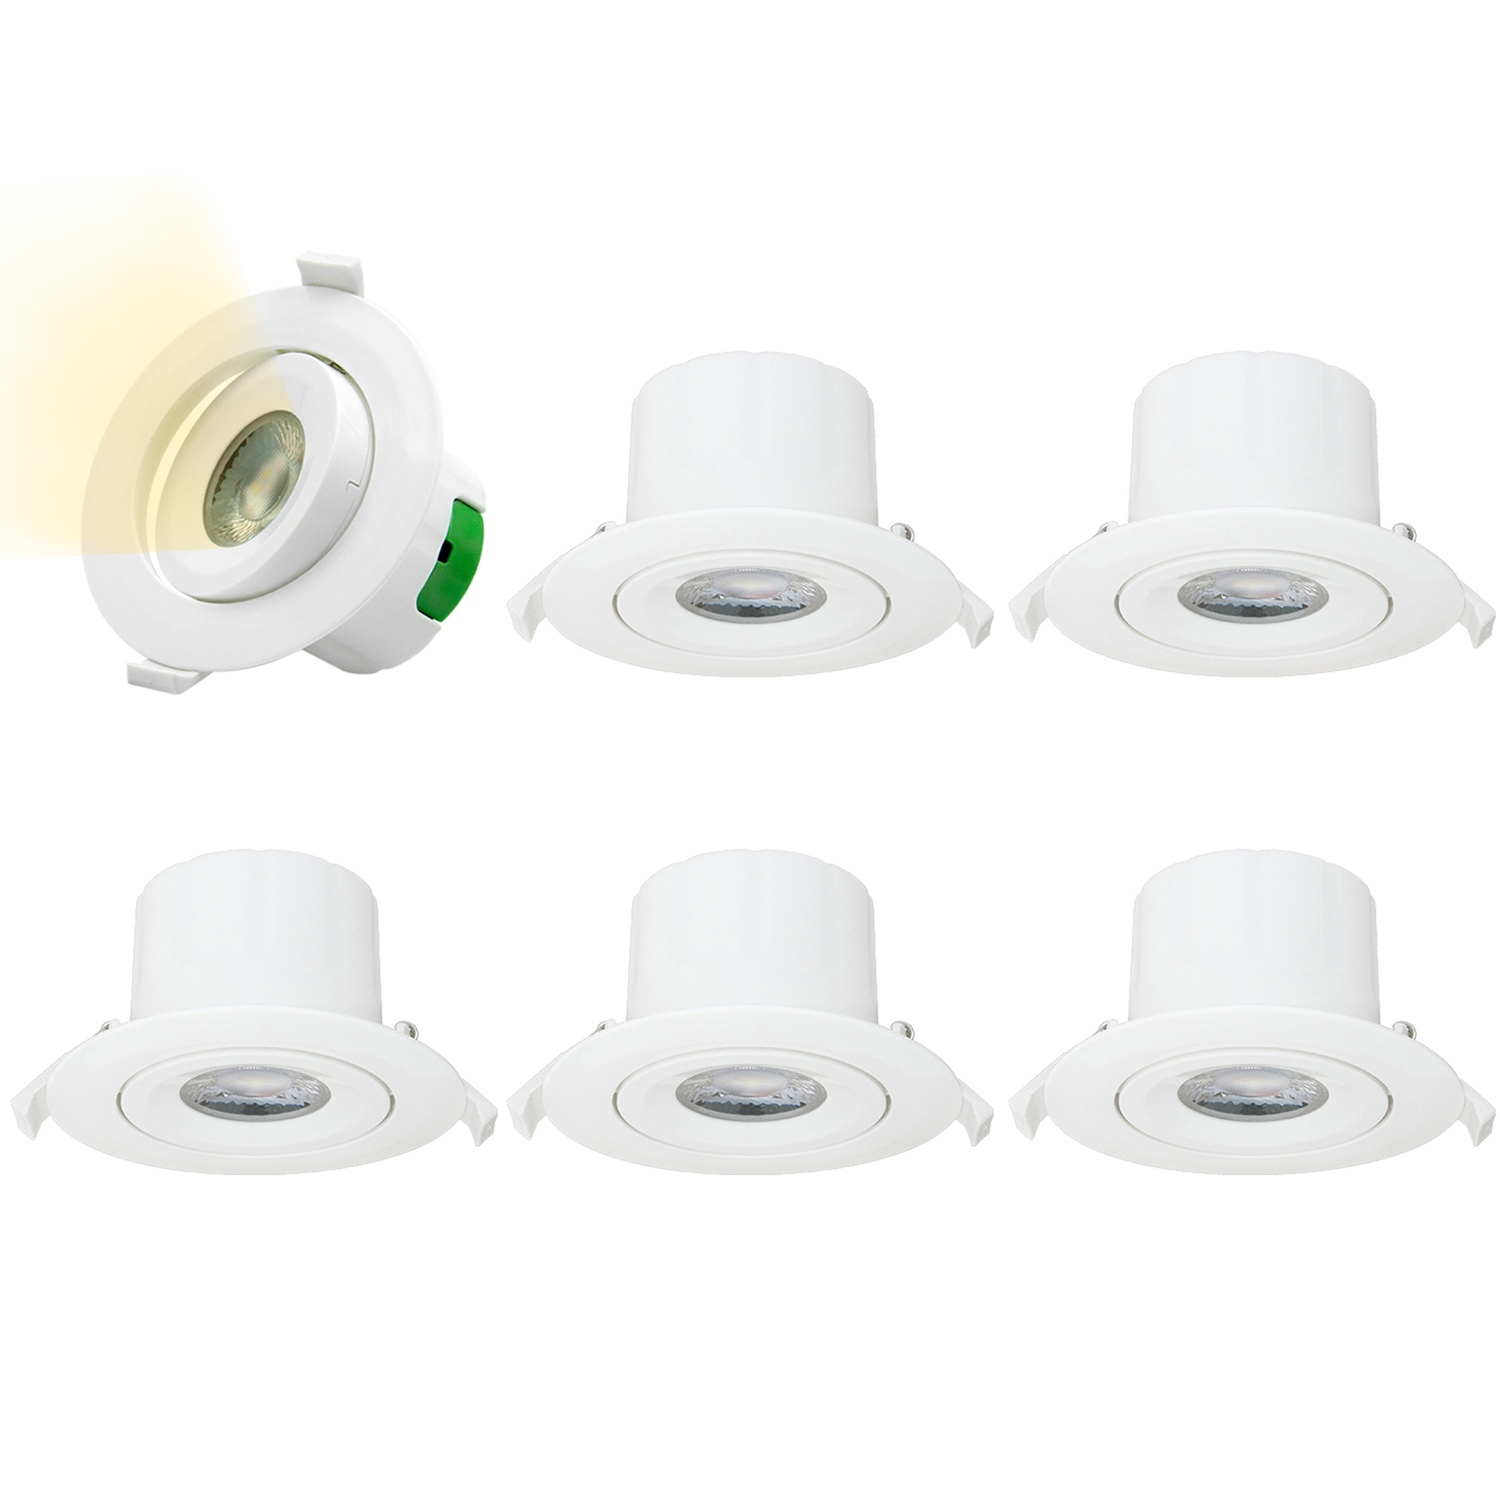 3 Inch Angled 9w Led Spot Downlights Recessed Ceiling Lighting